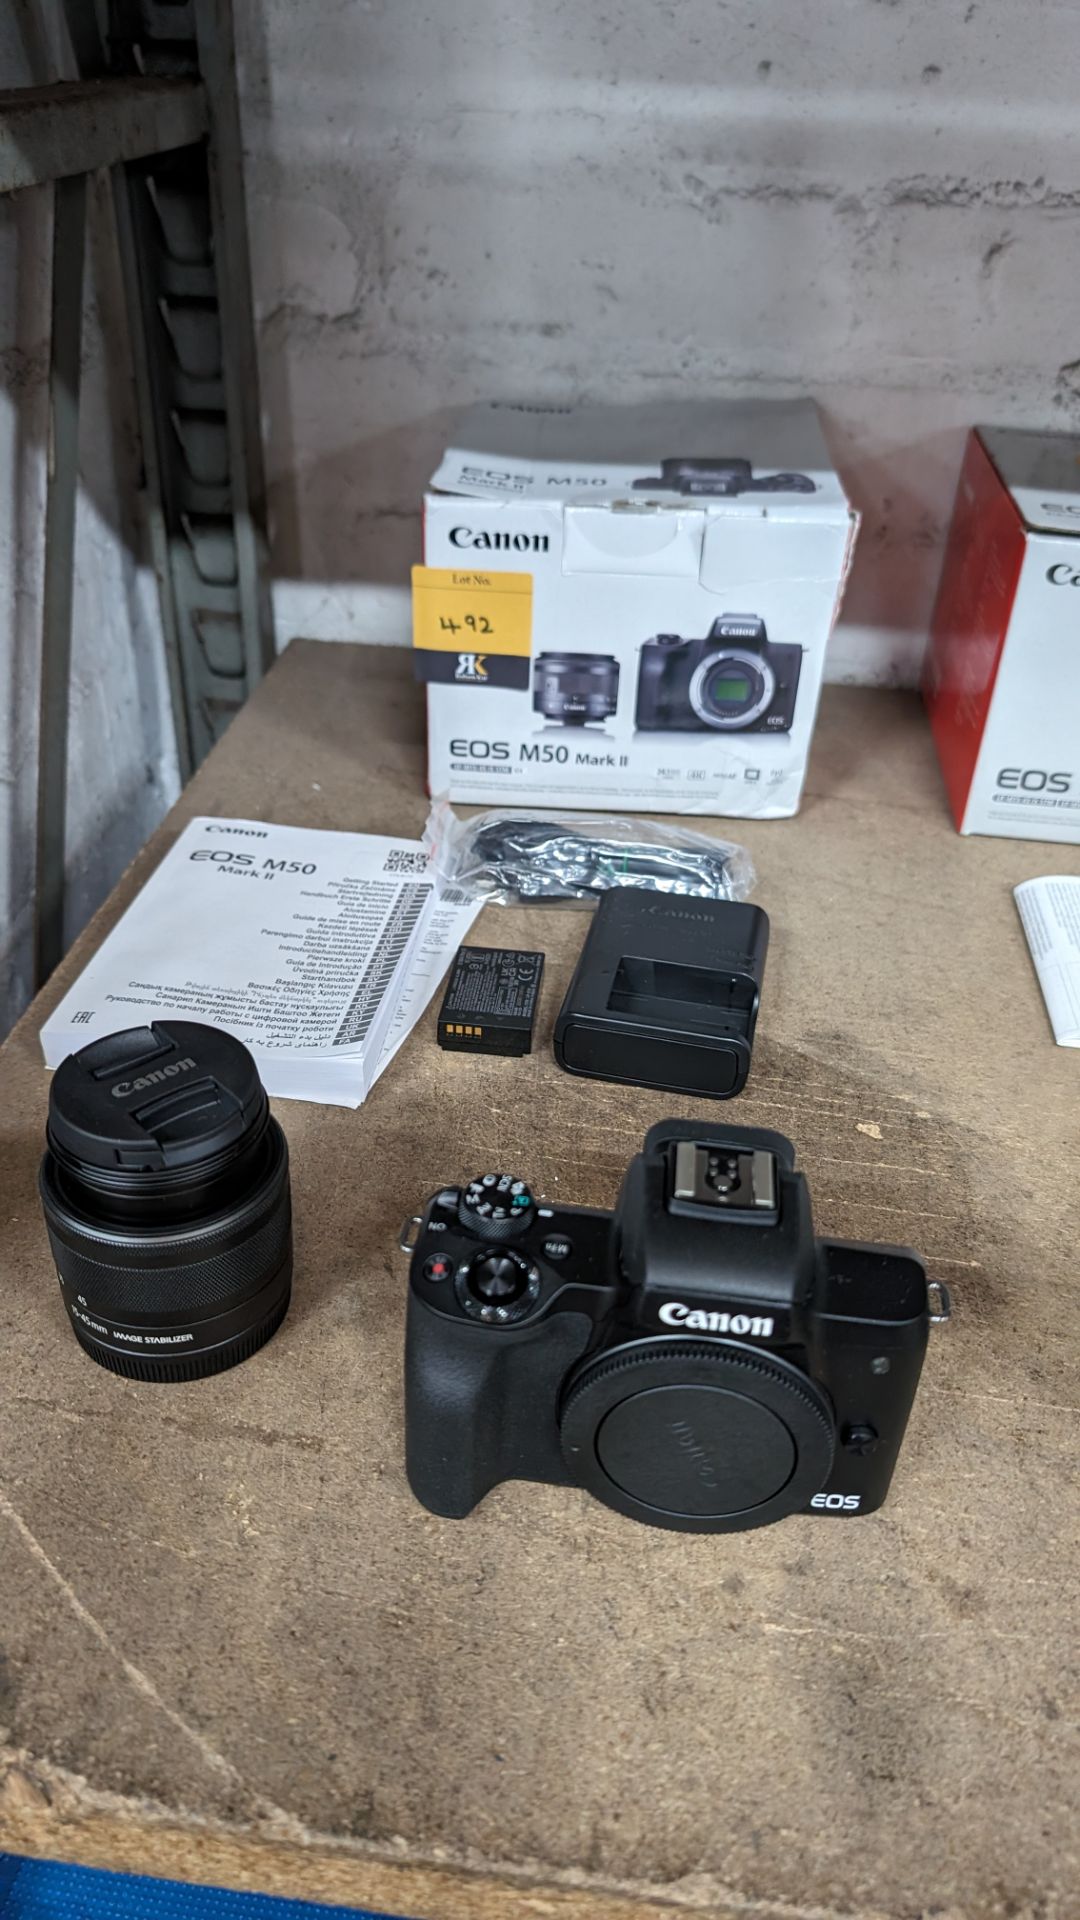 Canon EOS M50 MARK II camera, including 15-45mm image stabilizer lens, plus battery and charger - Image 14 of 14